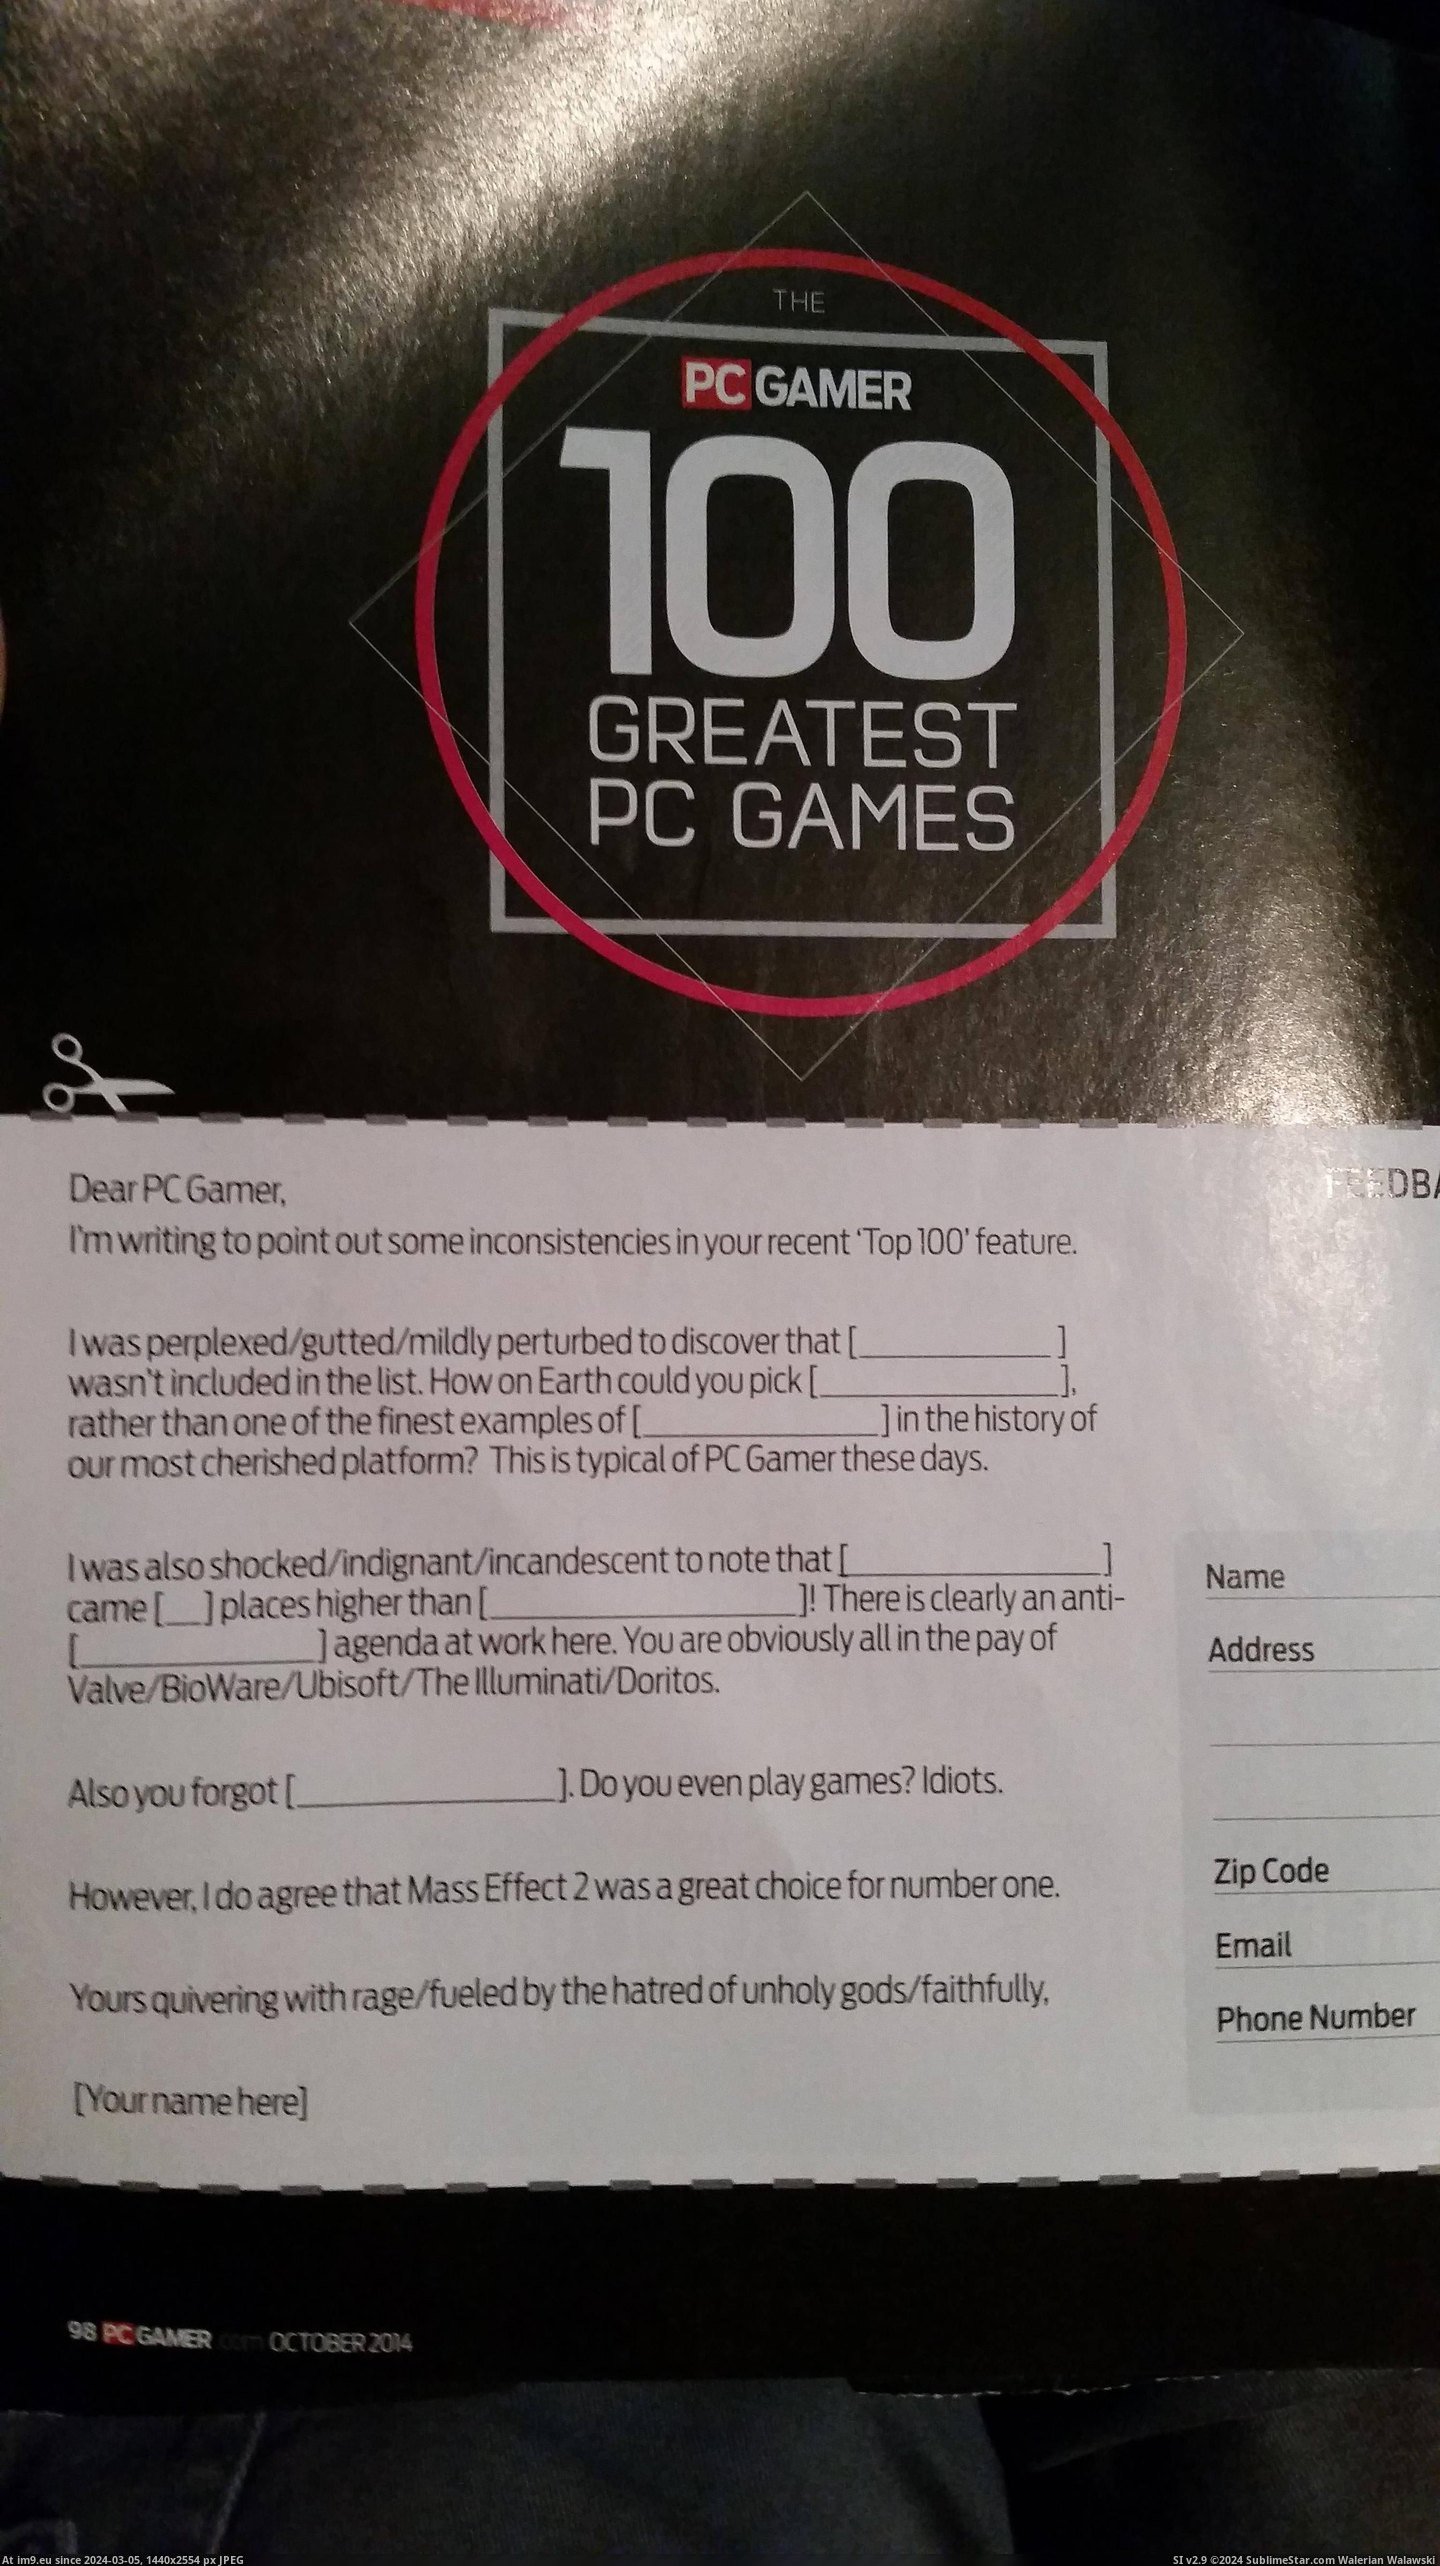 #Gaming #Top #Games #Greatest #Gamer #List #Magazine #Included #Latest [Gaming] In the back of the latest PC Gamer Magazine, which included a list of their Top 100 Greatest PC Games Pic. (Image of album My r/GAMING favs))